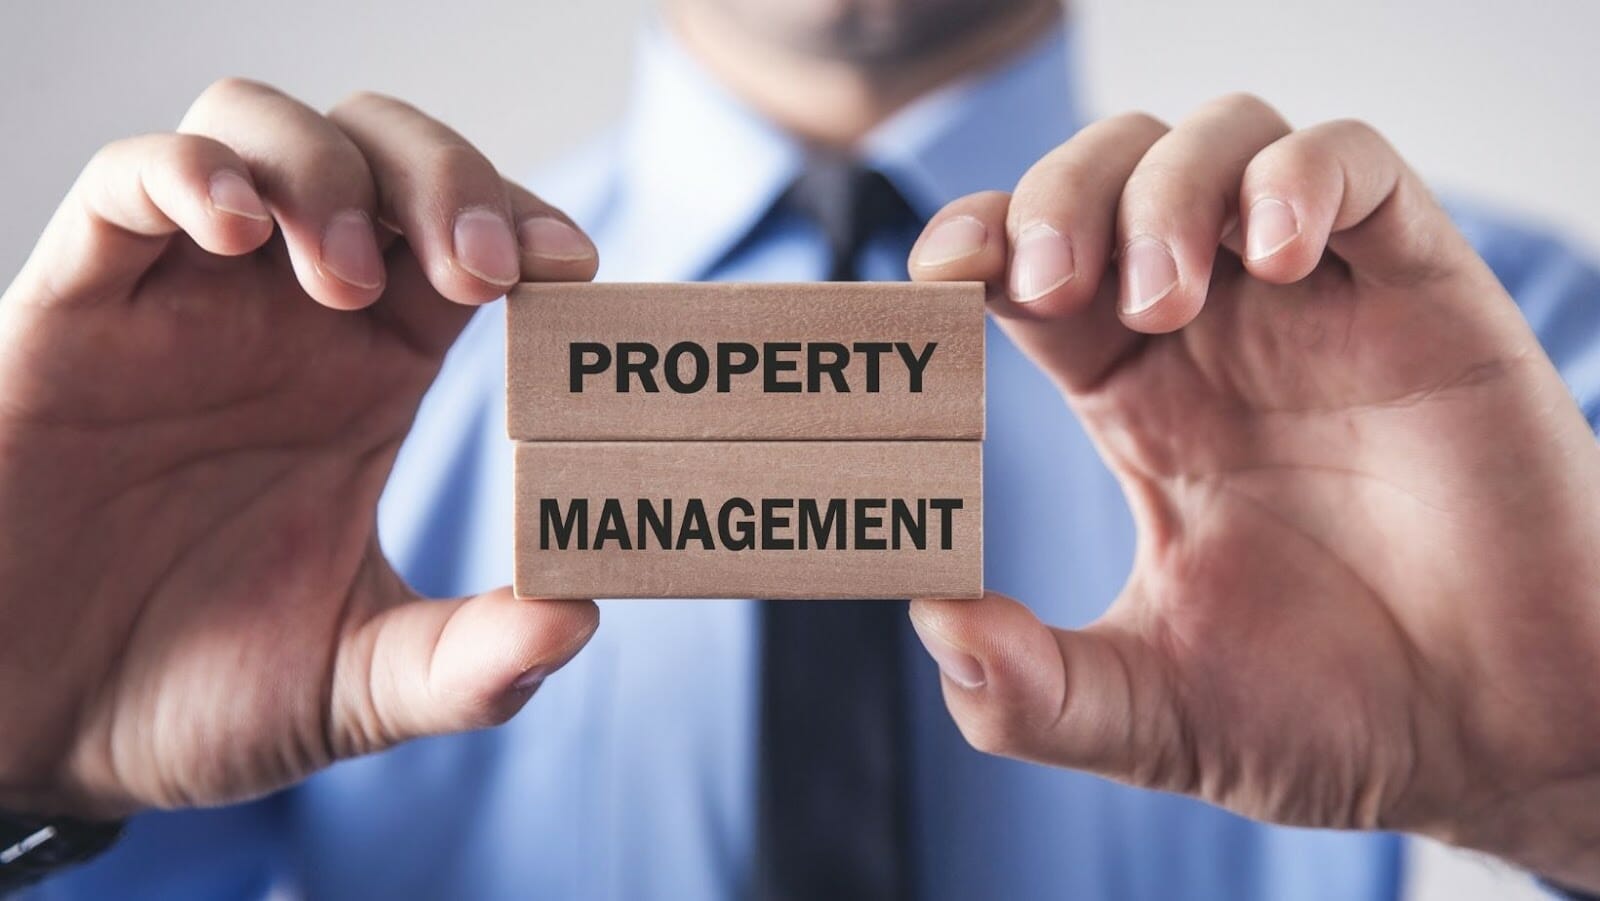 Grow Your Rental Business With Property Management In London